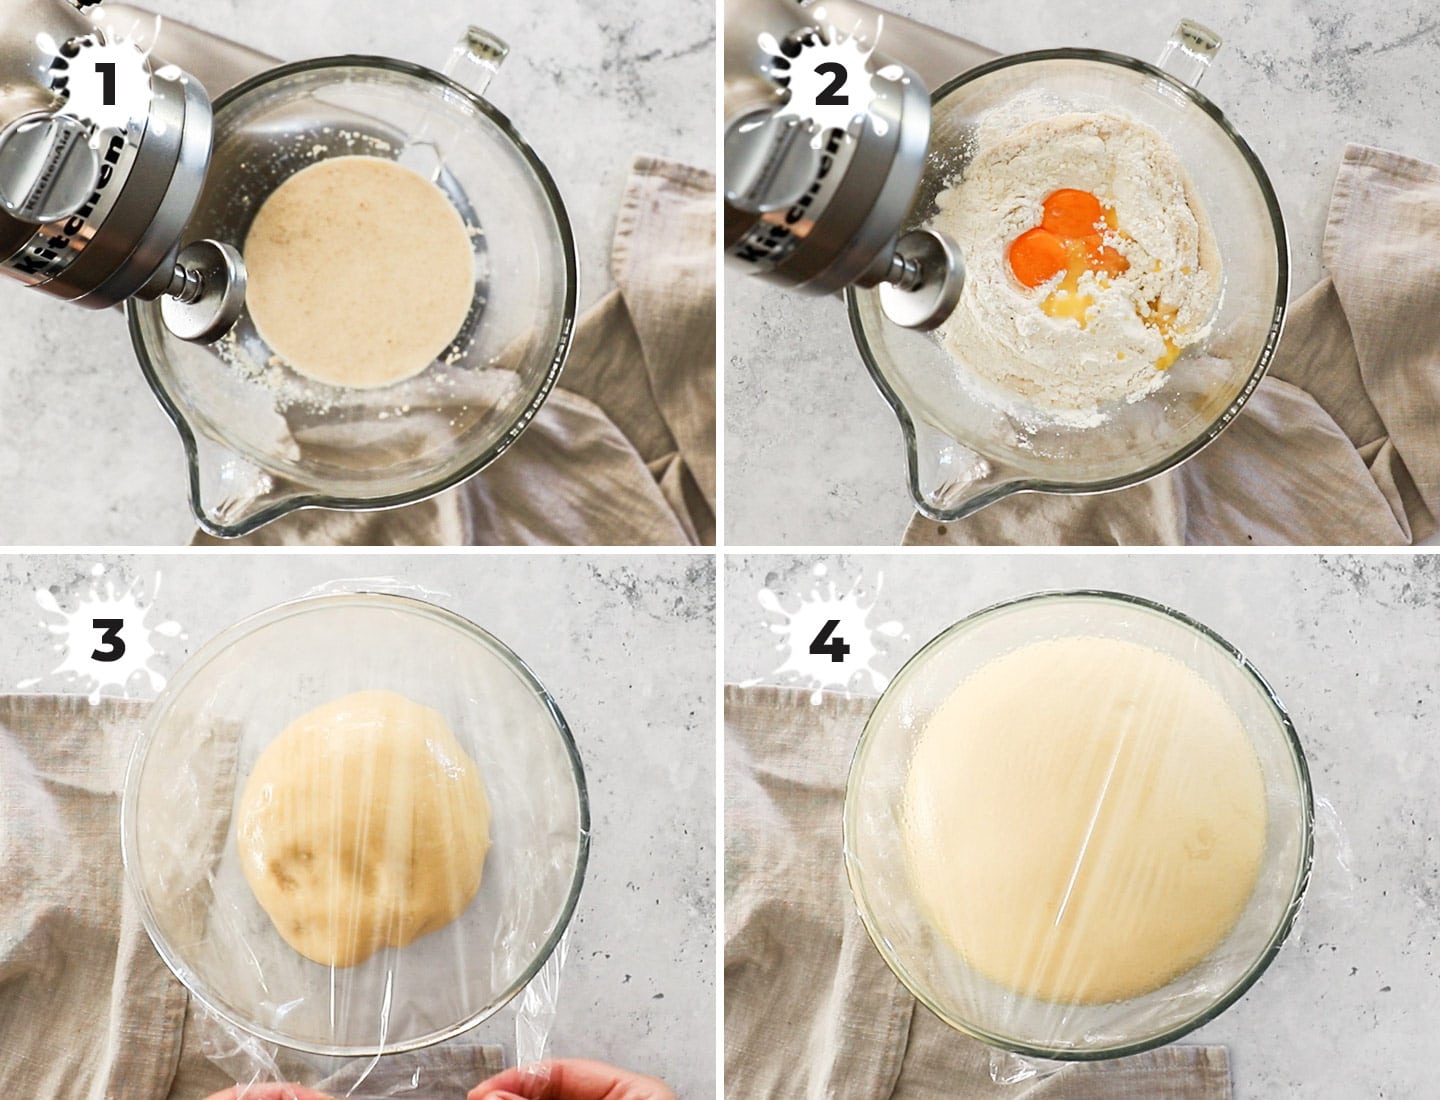 A collage showing how to make the donut dough.